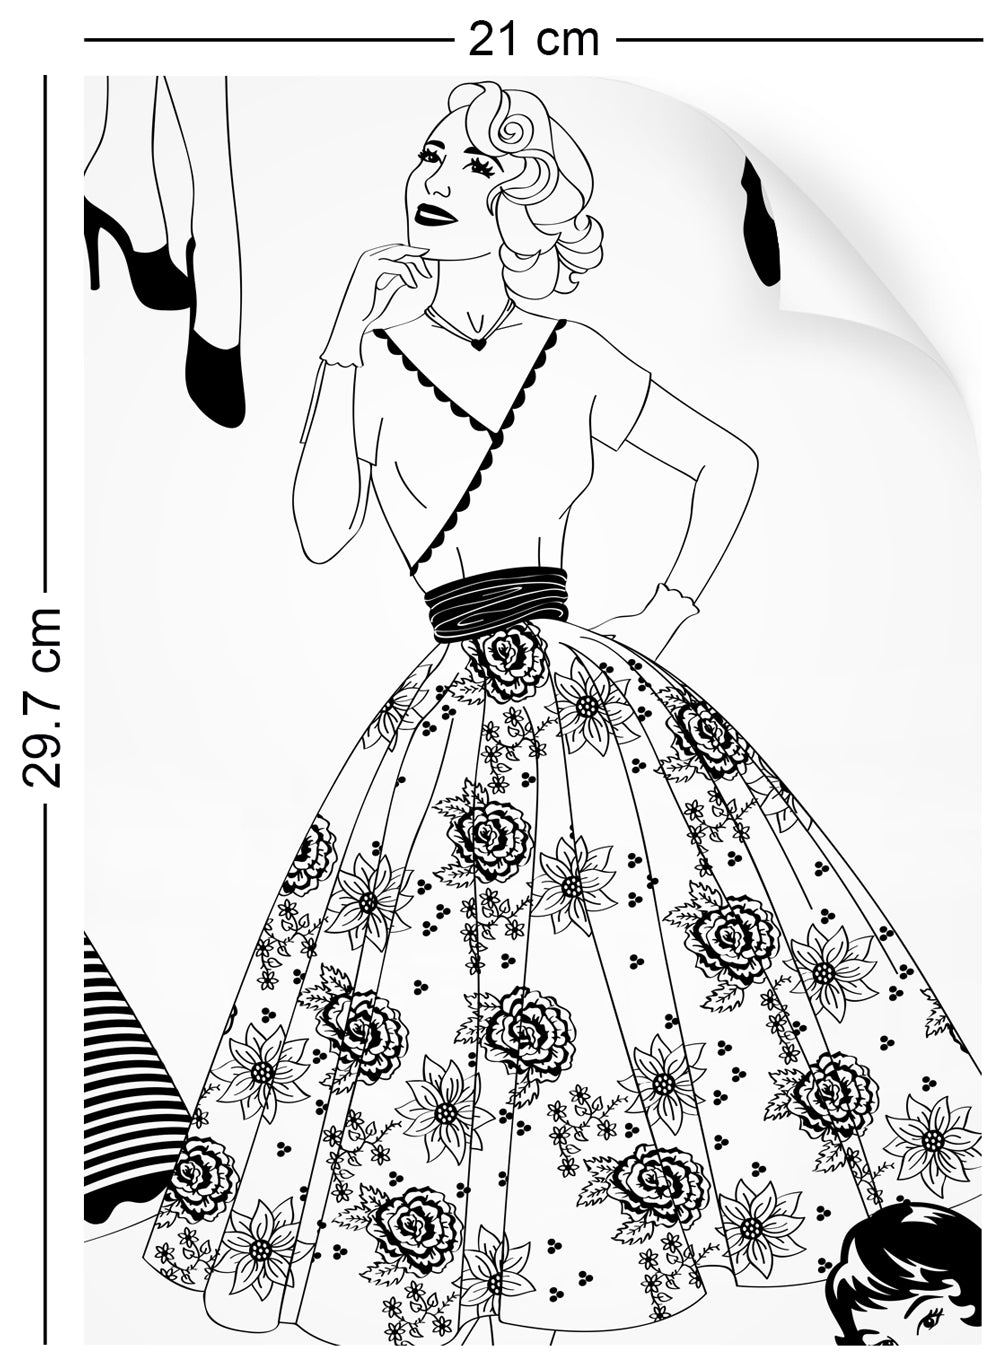 a4 wallpaper swatch with vintage dresses and ladies fashion in monochrome